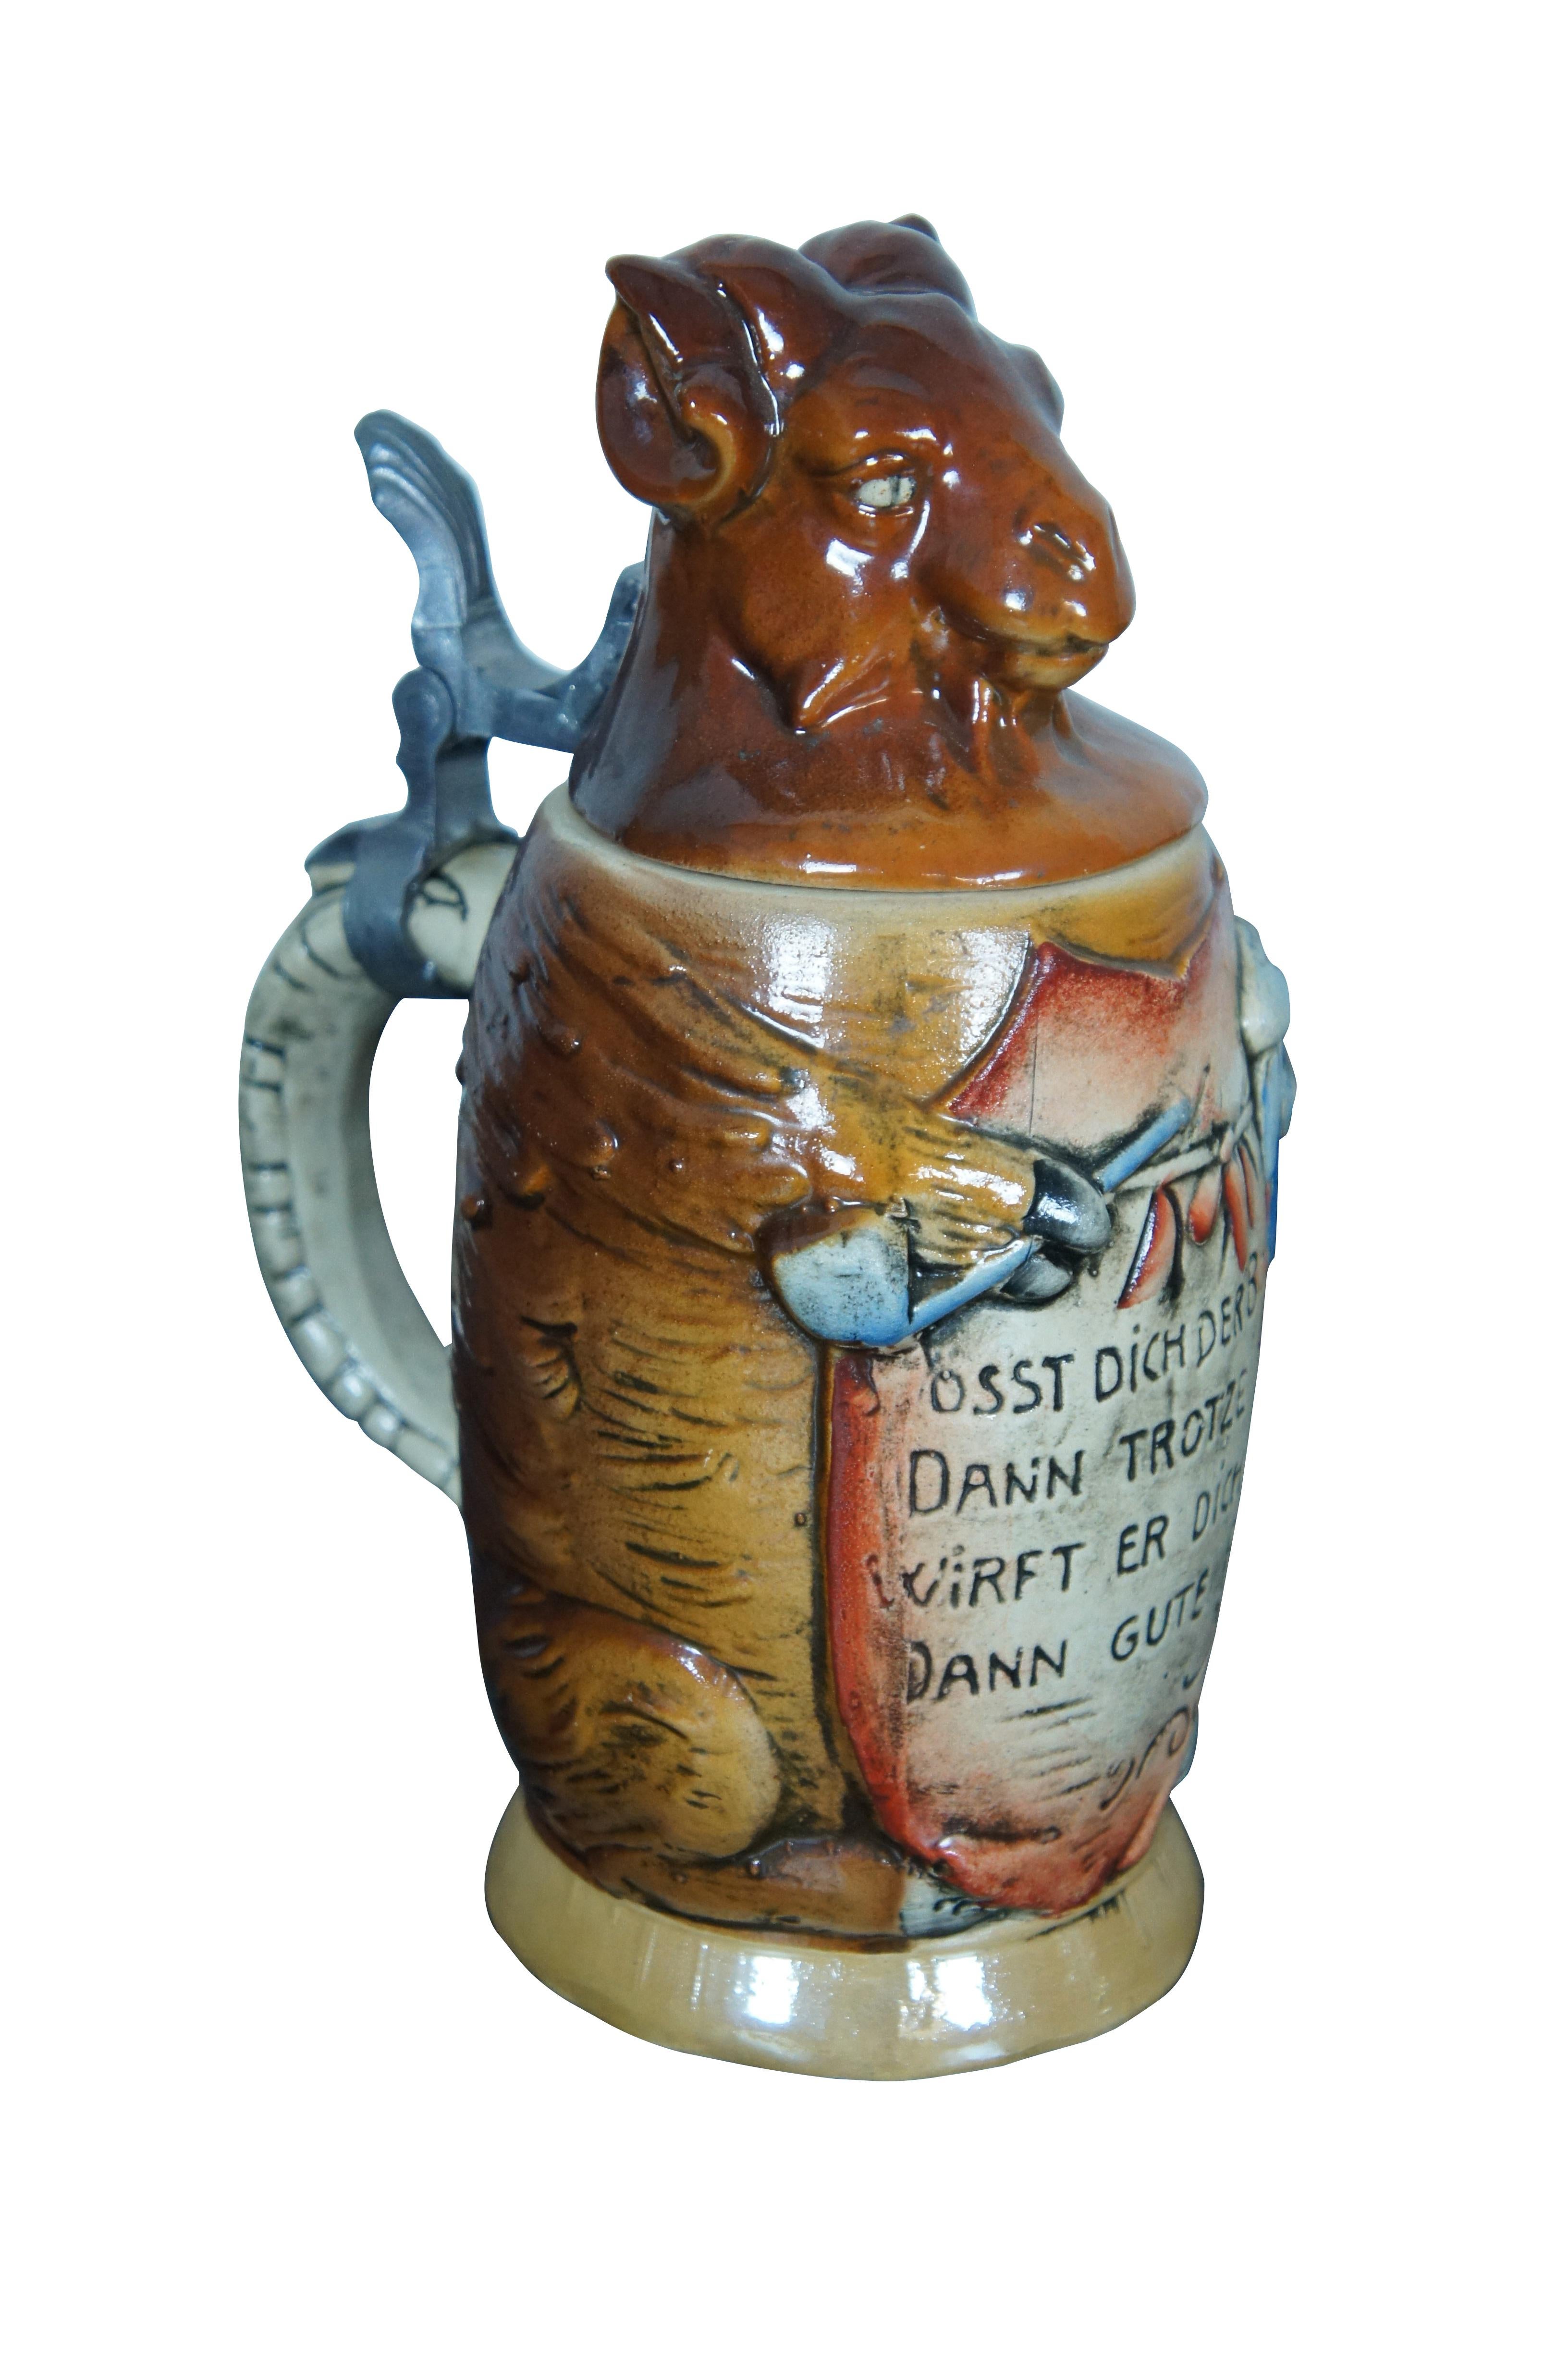 Pottery, figural, 0.5L (circa 1960).

Text:
ï¿½Stï¿½sst dich der Bock, dann trotze du,
wirft er dich um, dann gute Ruh!ï¿½
(If the bock hits you, then resist,
if it throws you, then rest well!)

The ram, or Bock, is the German symbol for Bockbier, a